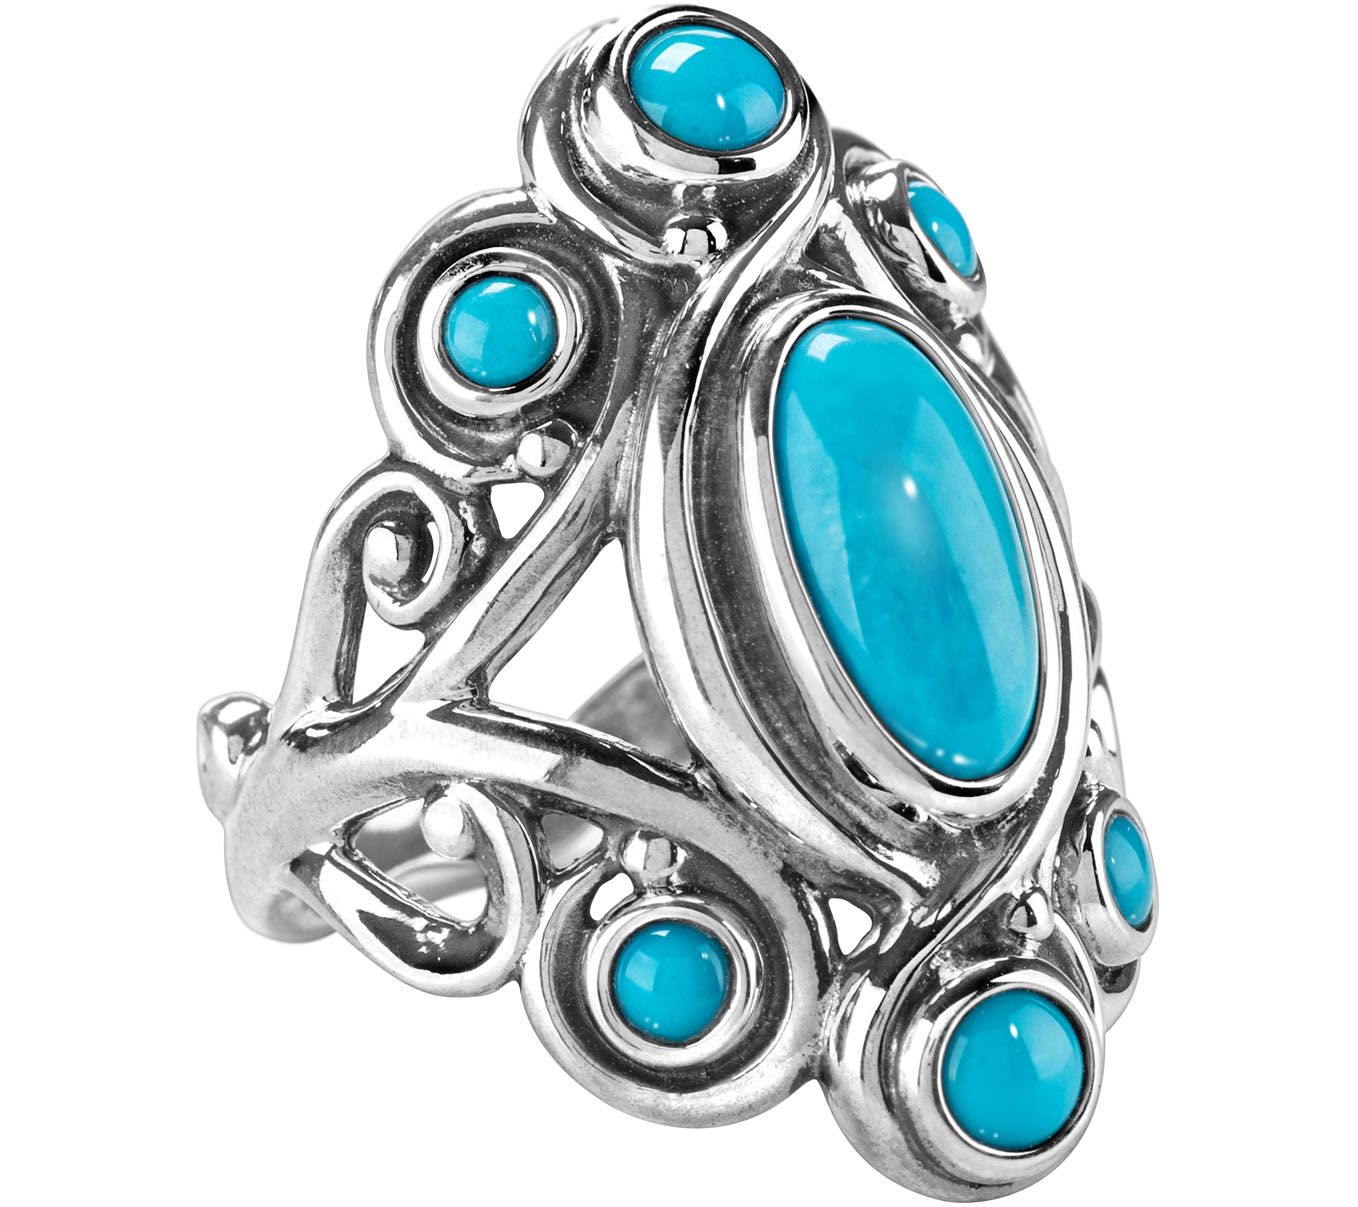 Details about   Carolyn Pollack  Sleeping Beauty Turquoise Cluster Ring  7 by American West 